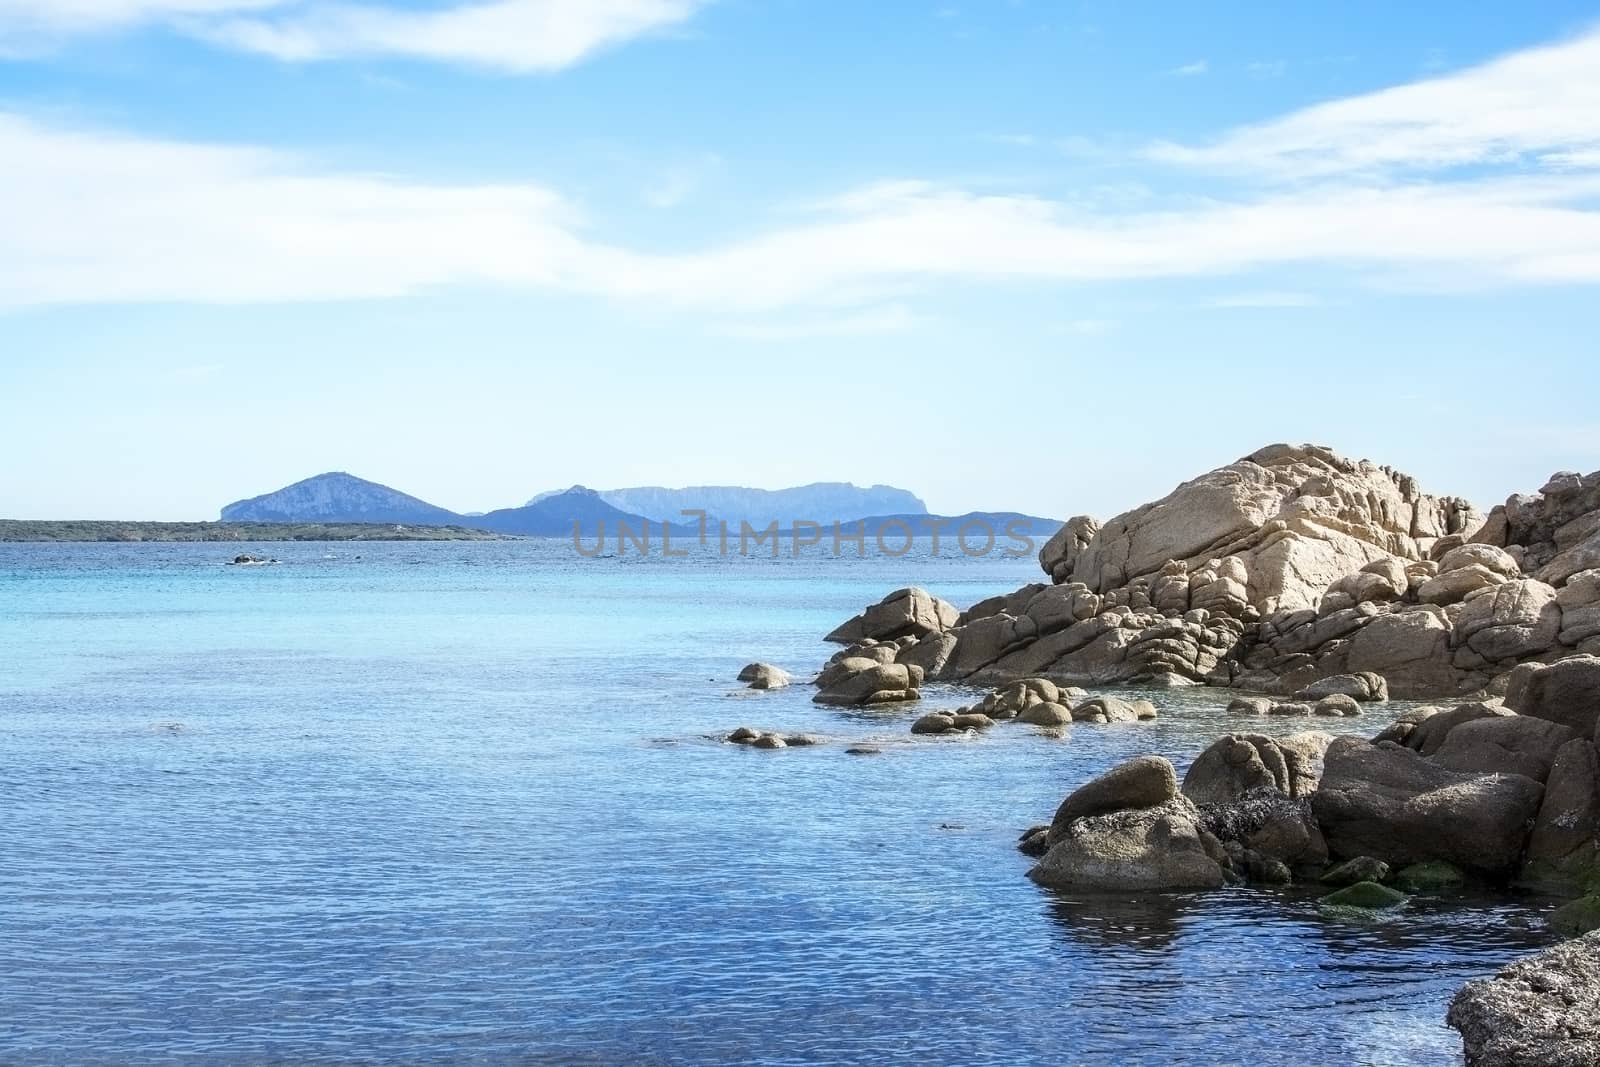 Green water and granite rock archipelago landscape on a beach in by ArtesiaWells